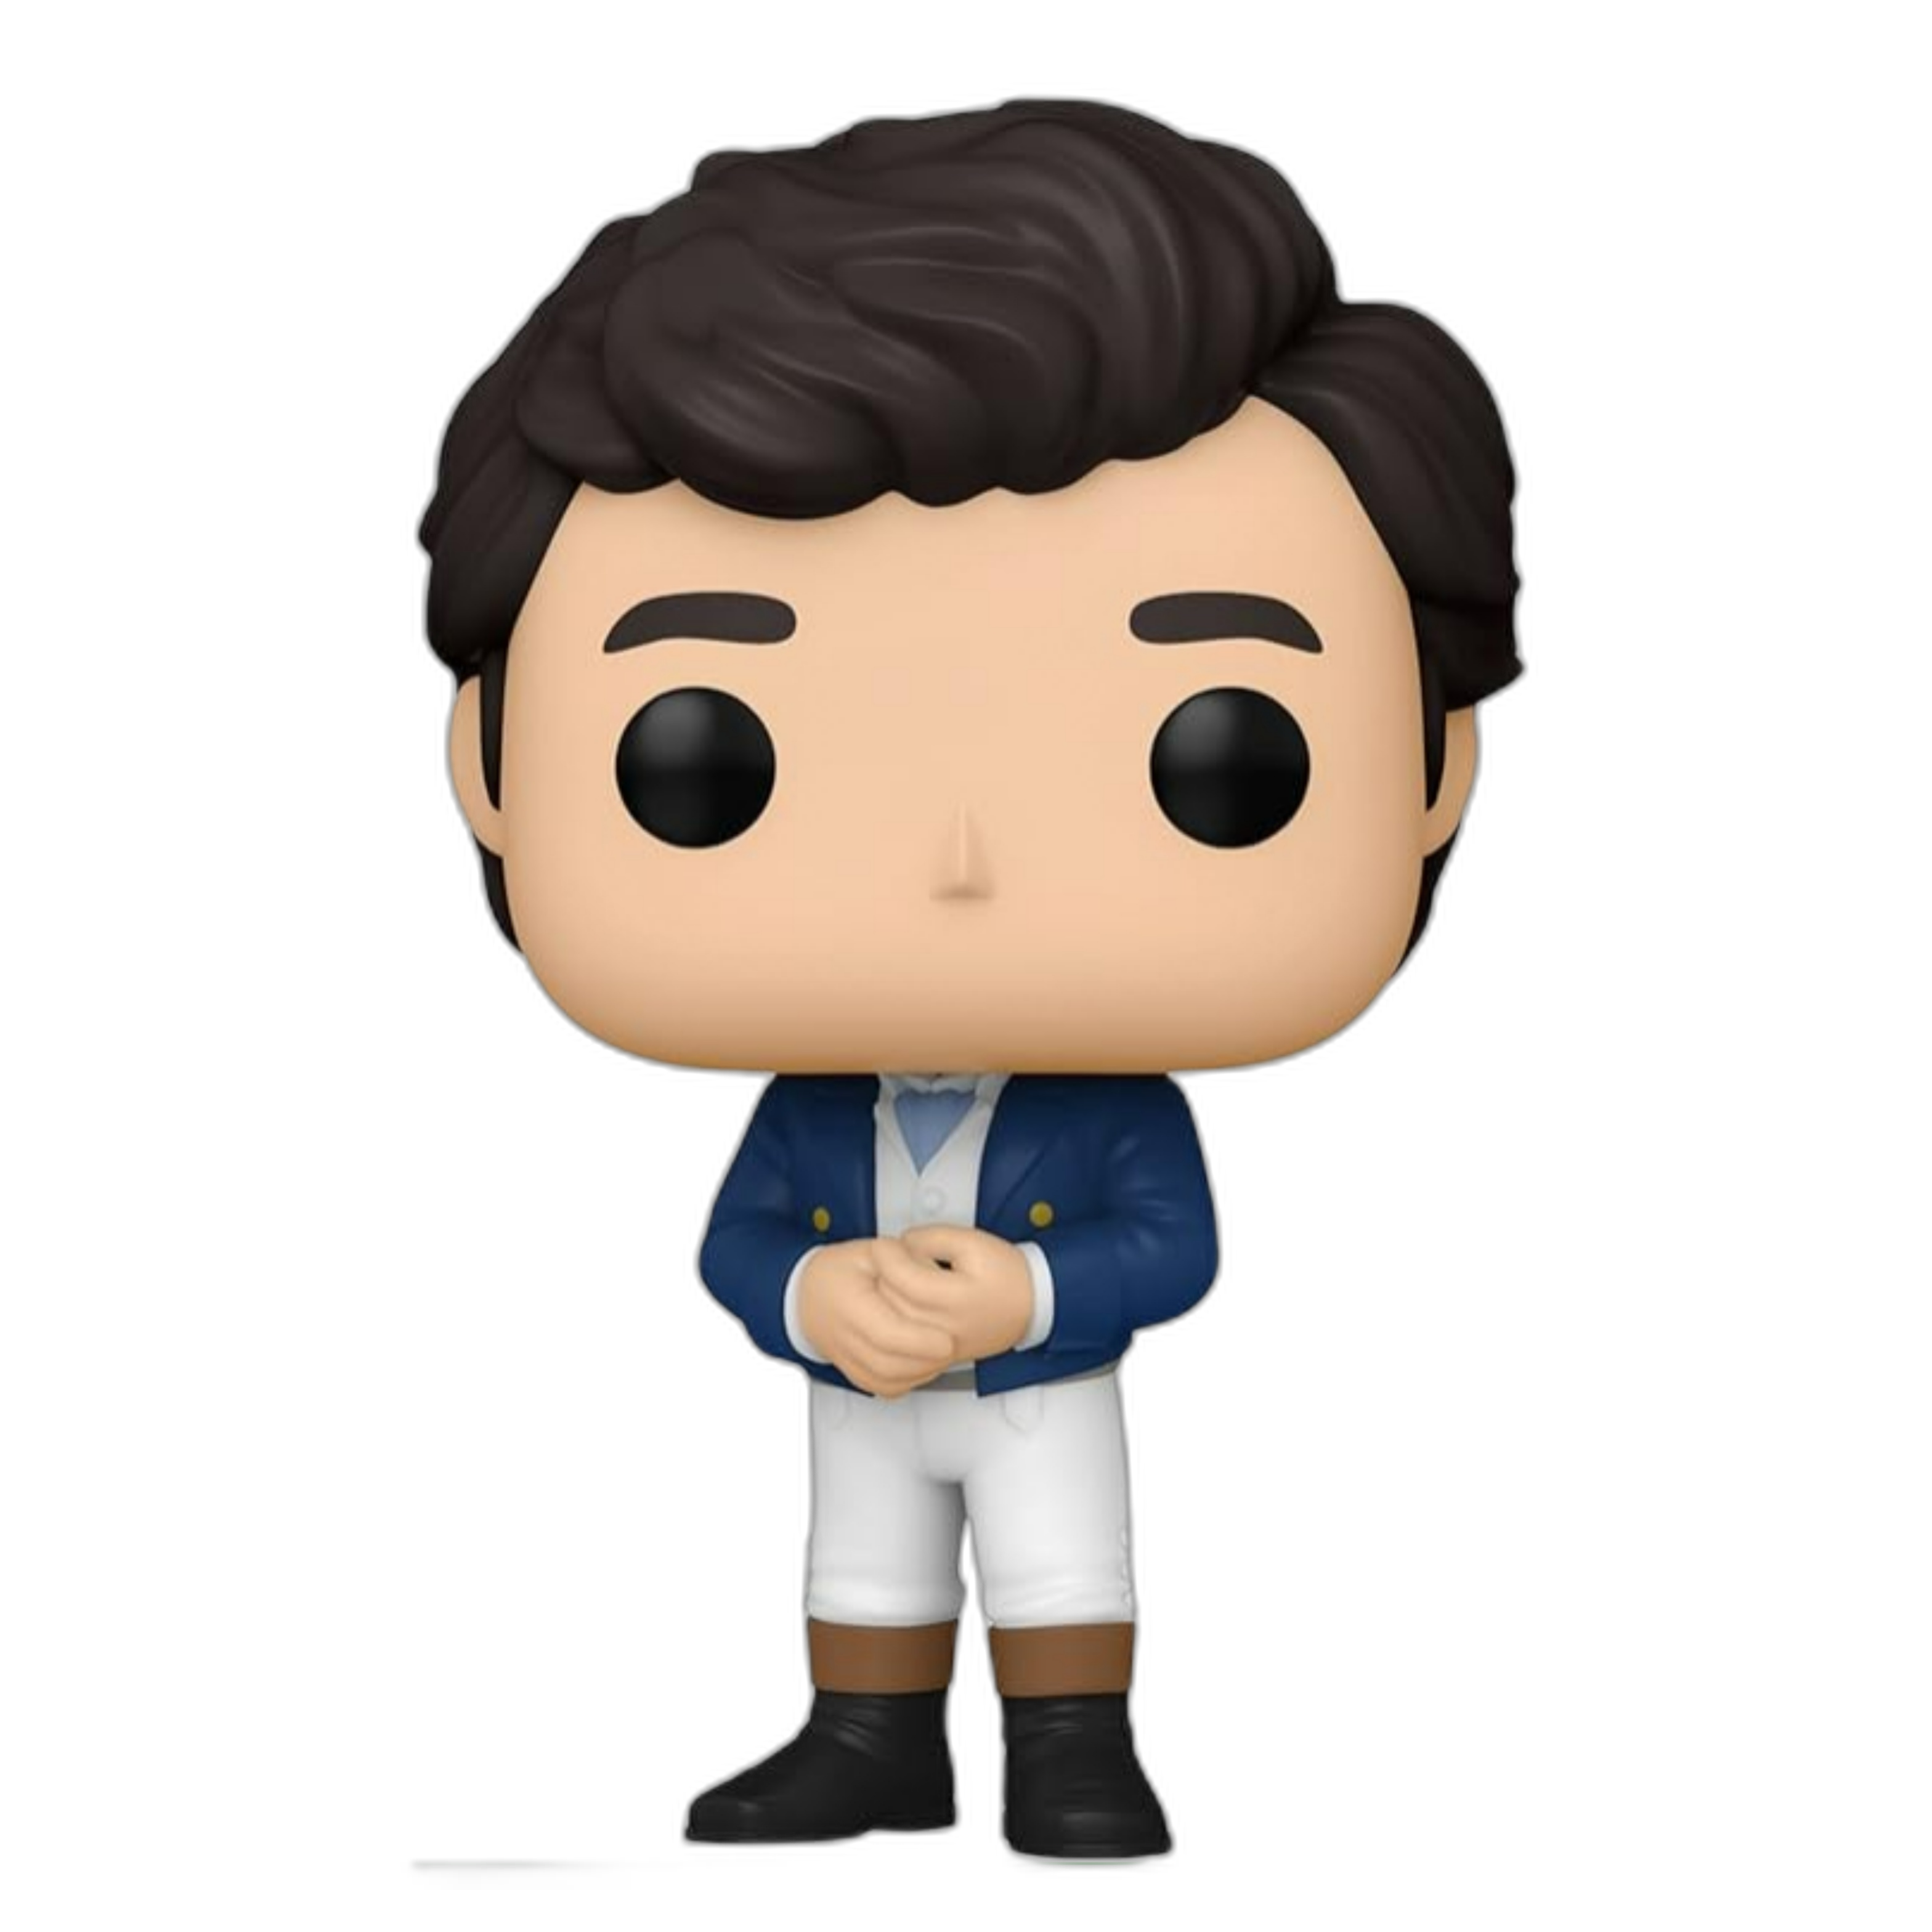 Funko Pop Prince Eric from the live-action film of The Little Mermaid. 